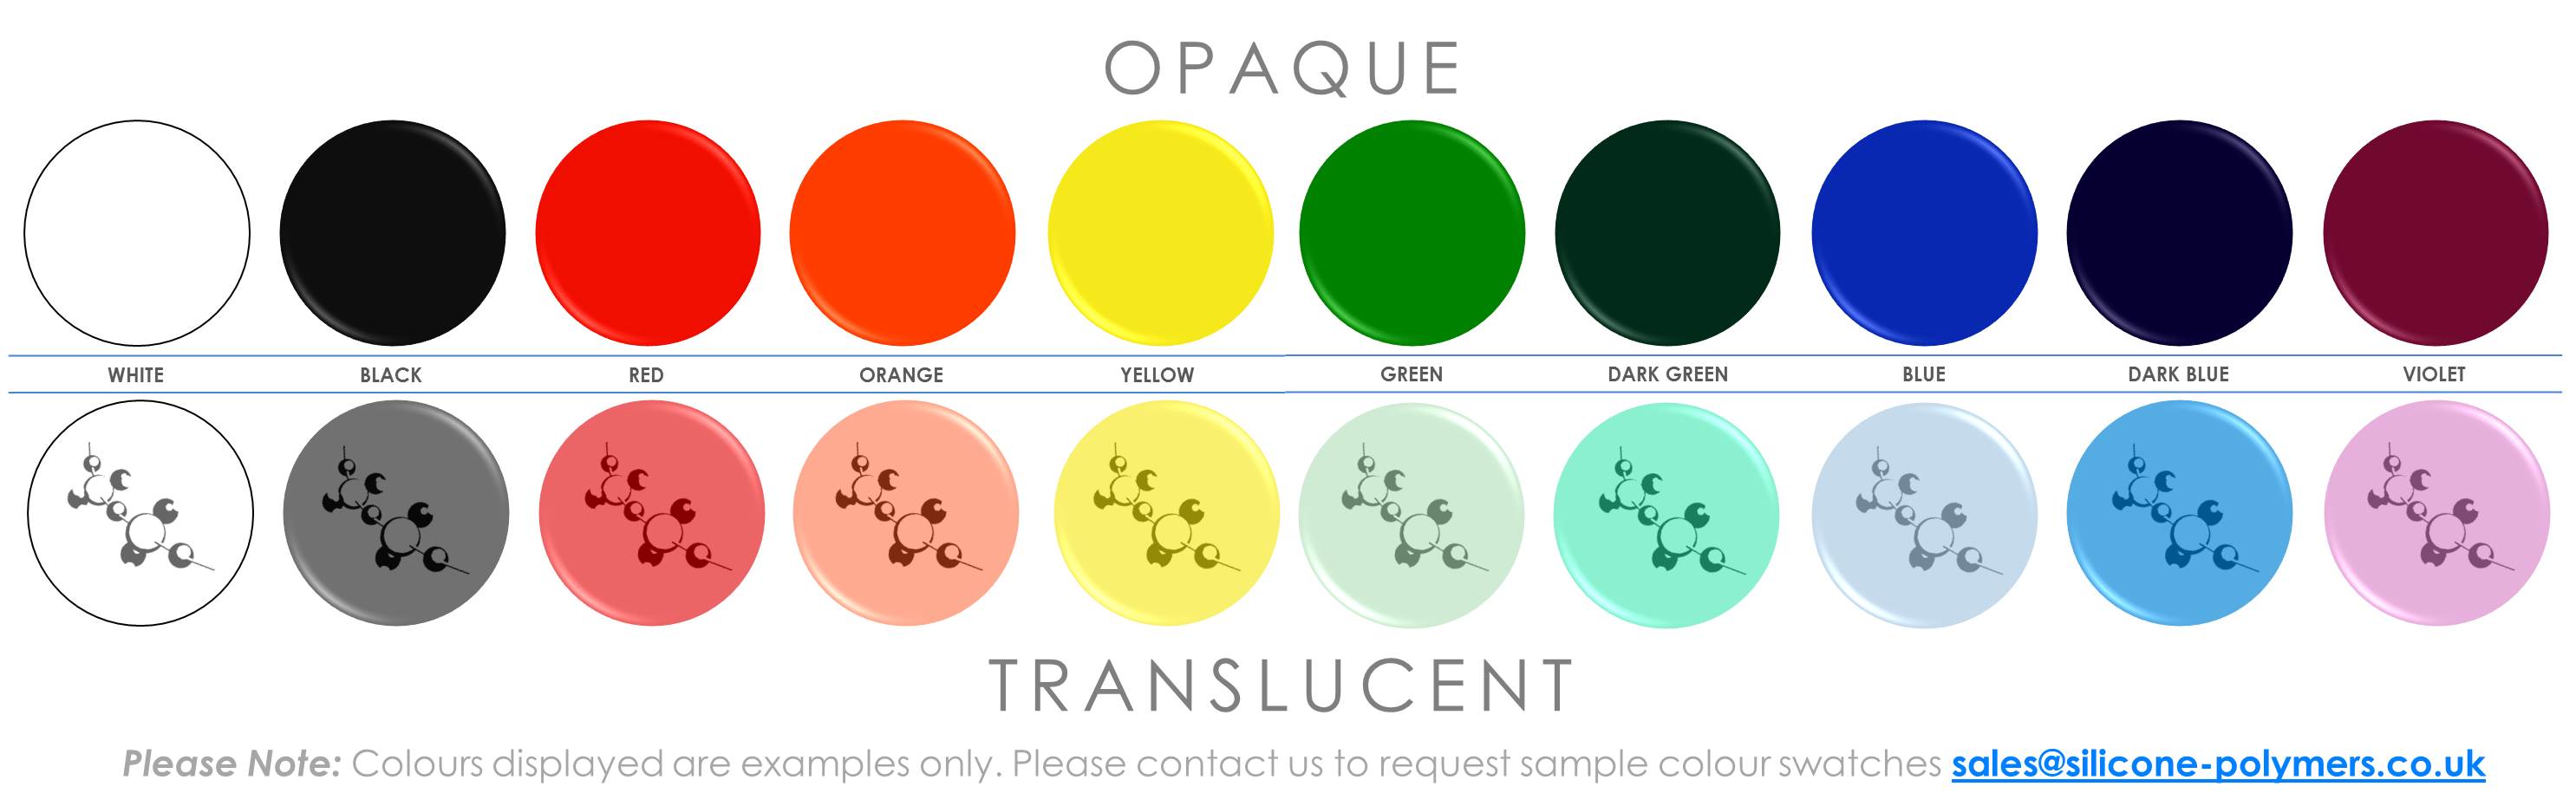 Opaque and Translucent Colour Swatches